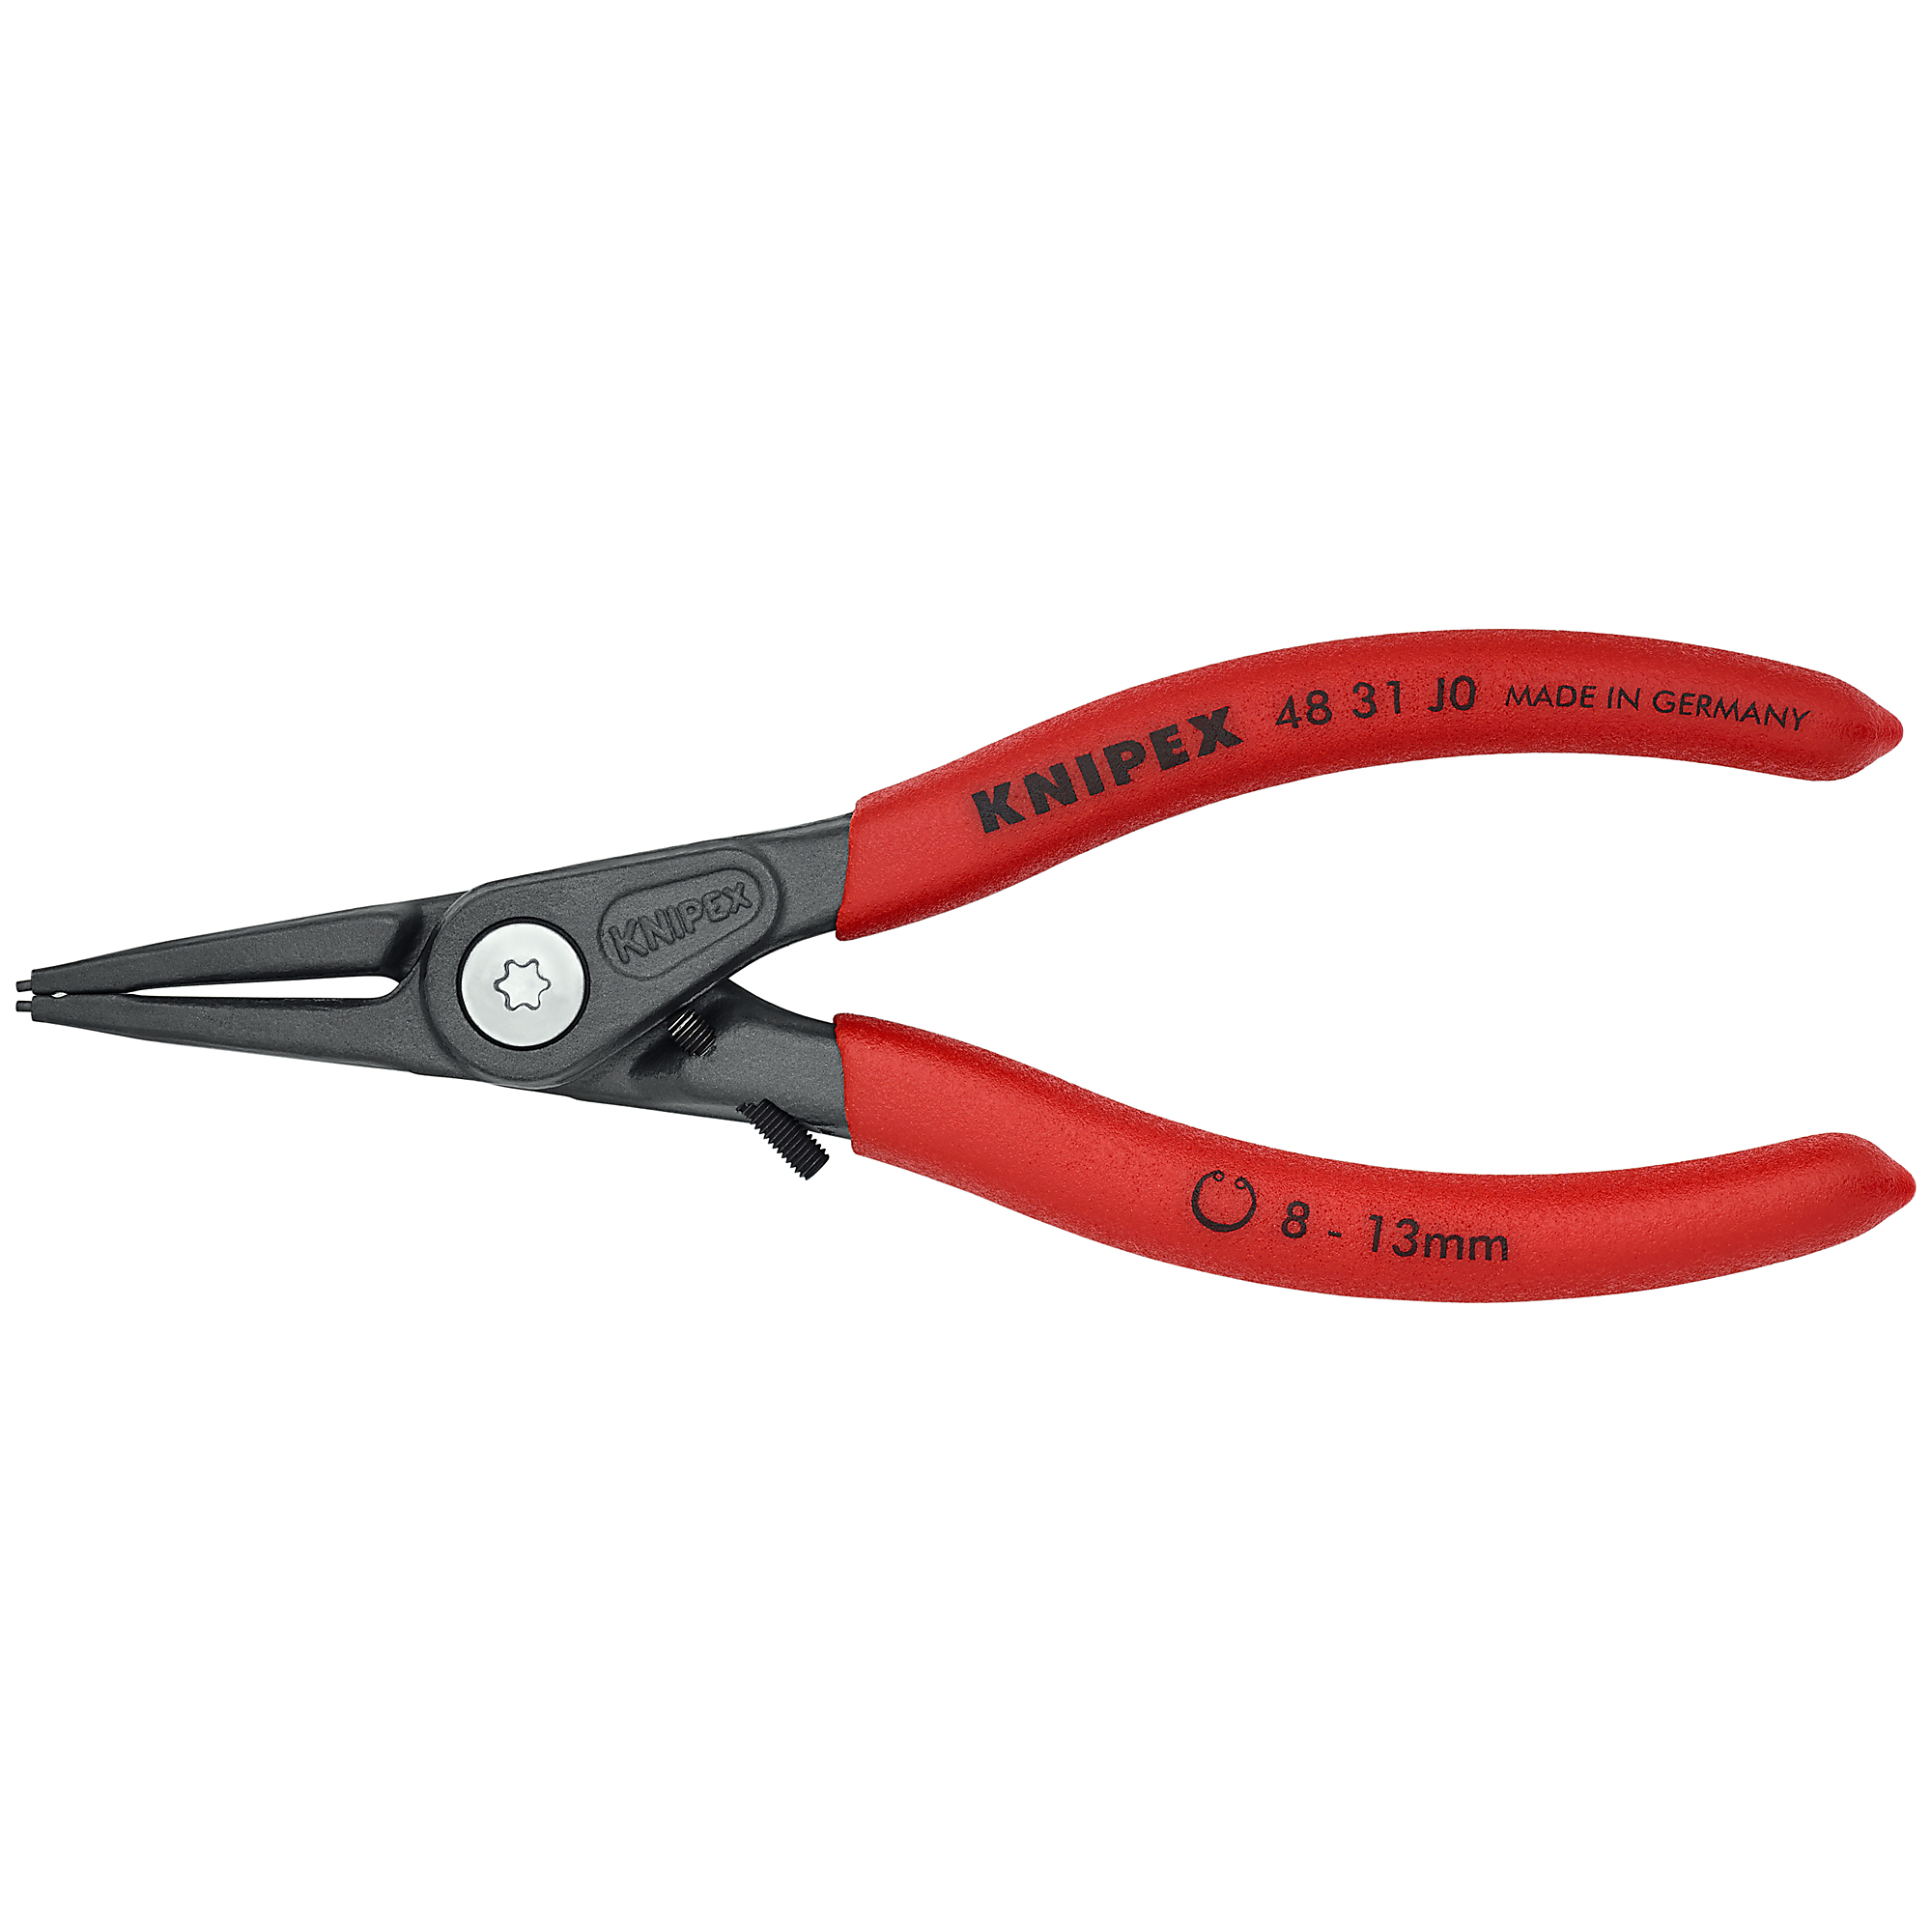 KNIPEX, Int Prec. Snap Ring Pliers-Limiter, 1/32 tip,5.5Inch, Pieces (qty.) 1 Material Steel, Model 48 31 J0